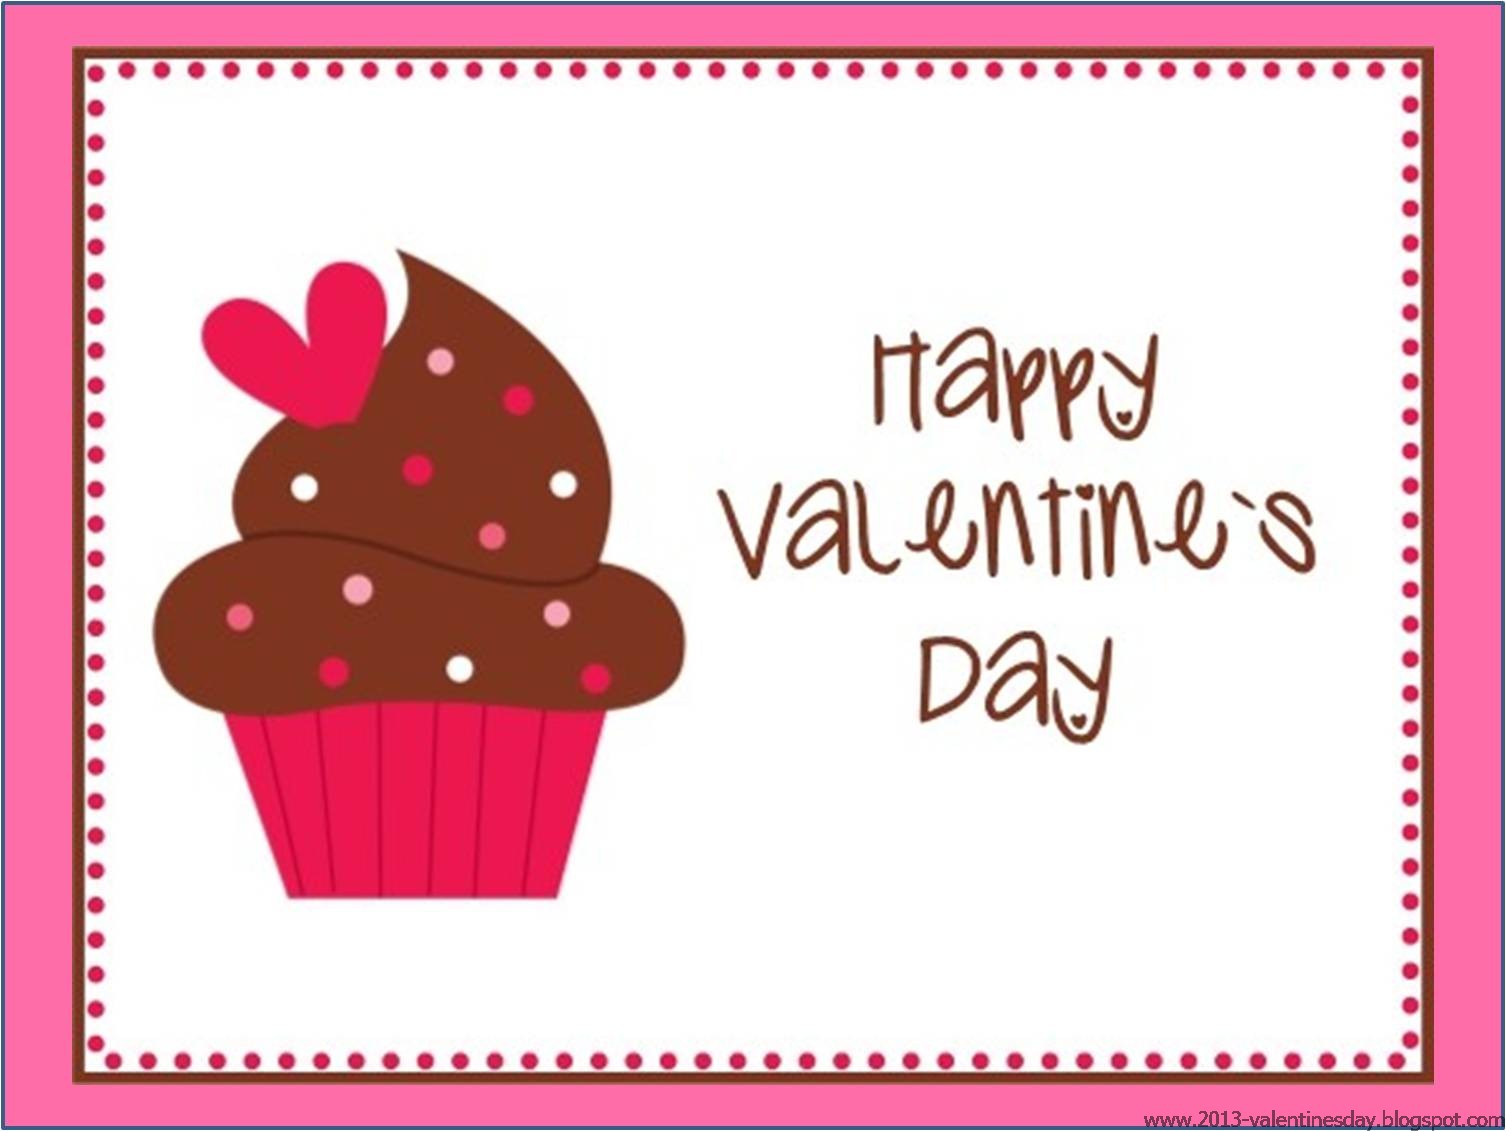 Valentines day Clip Art Collection 2013 | Online Quotes Gallery1506 x 1131